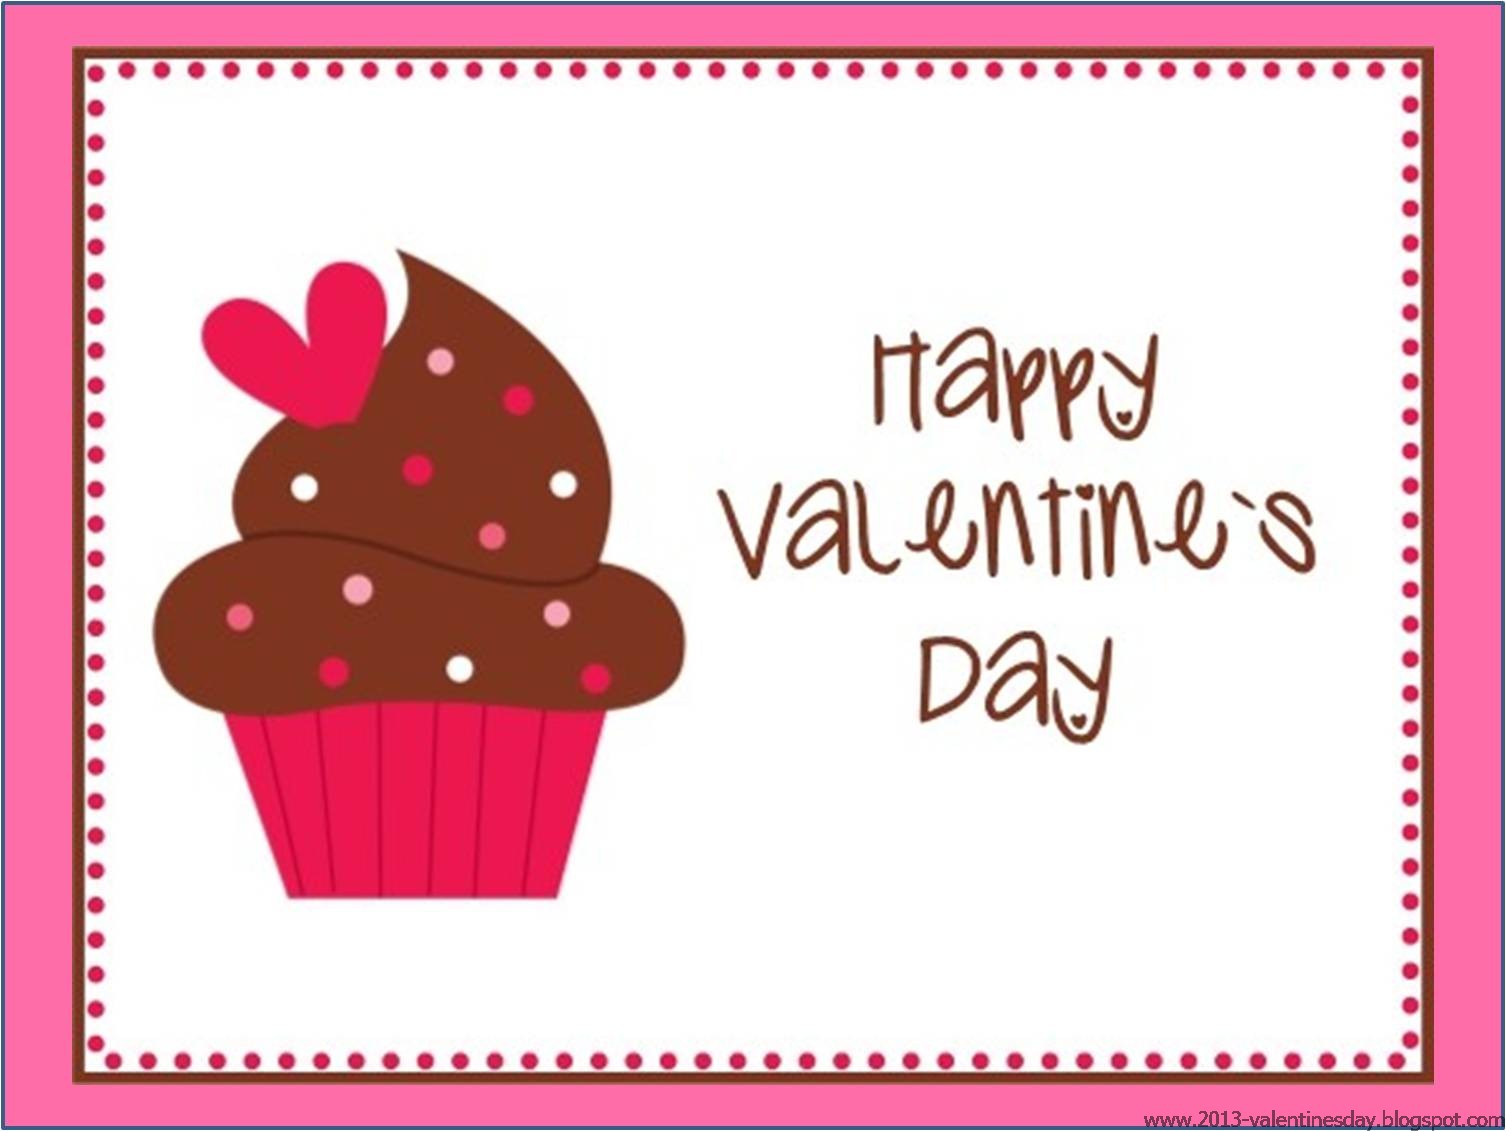 Valentines day Clip Art Collection 2013 | Online Quotes Gallery1506 x 1131